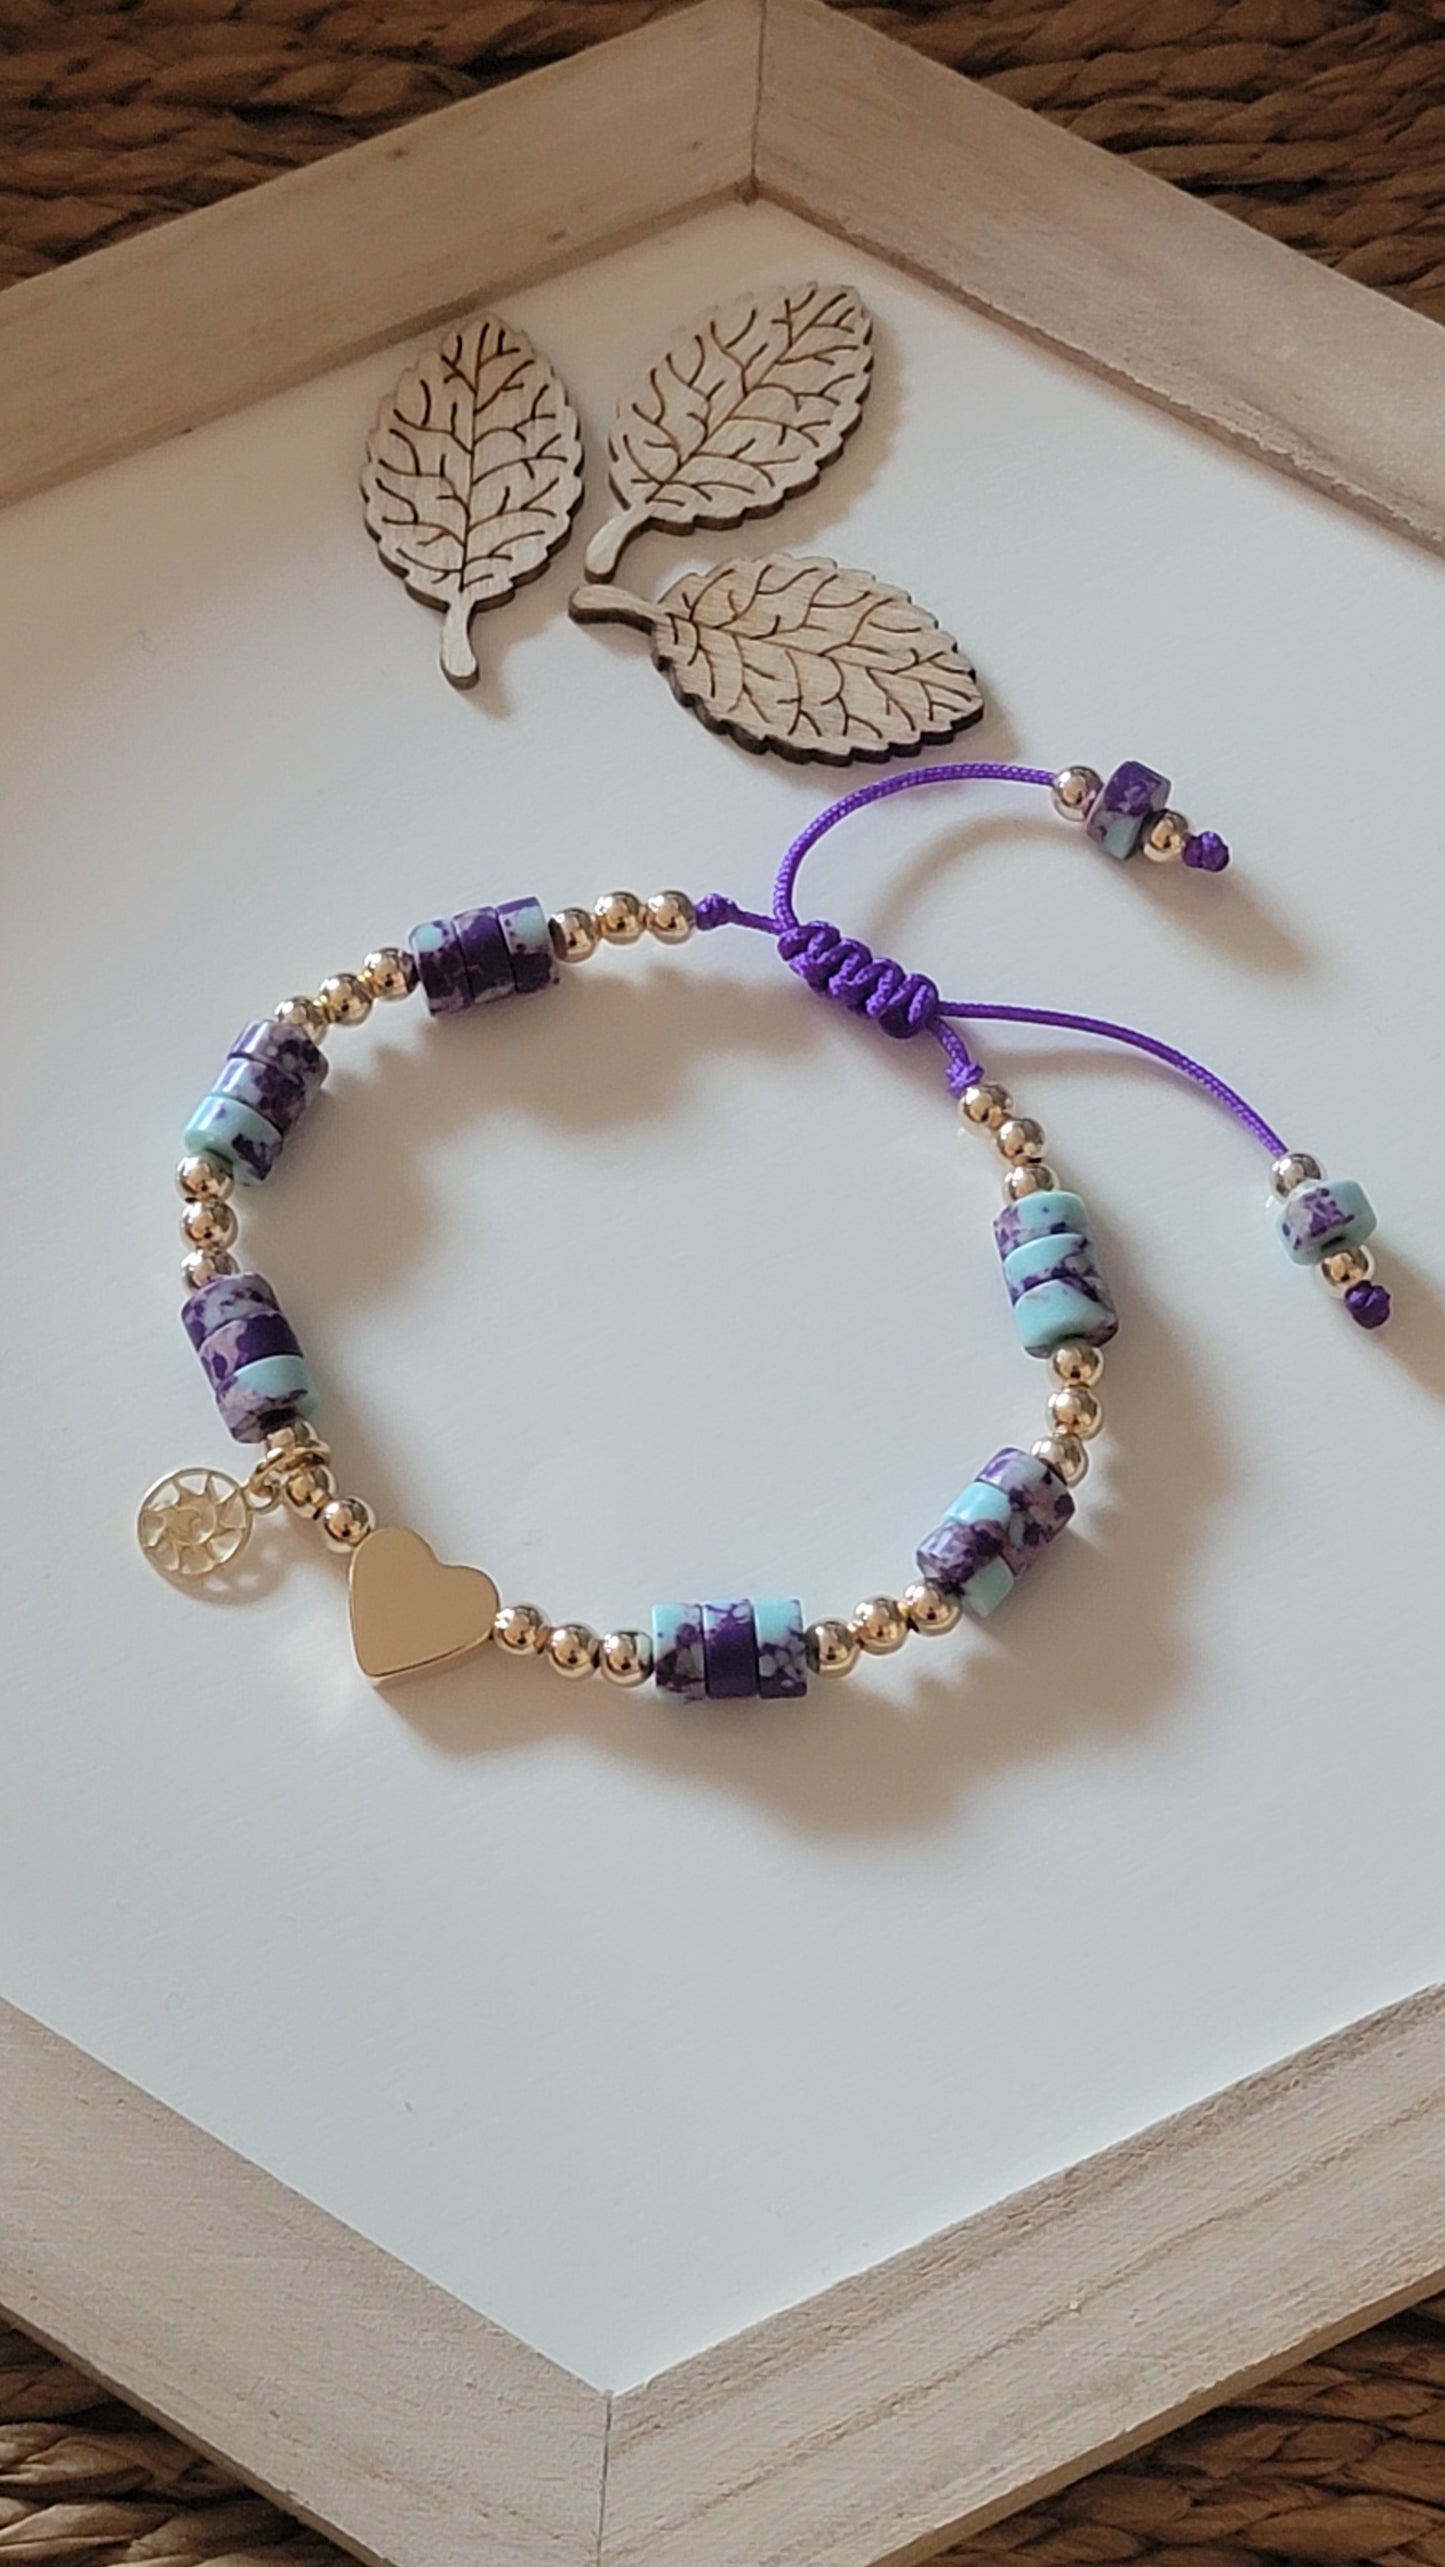 Handmade Bracelet 18k Gold-Filled Heart and  Beads. Turquoise and Purple Beads